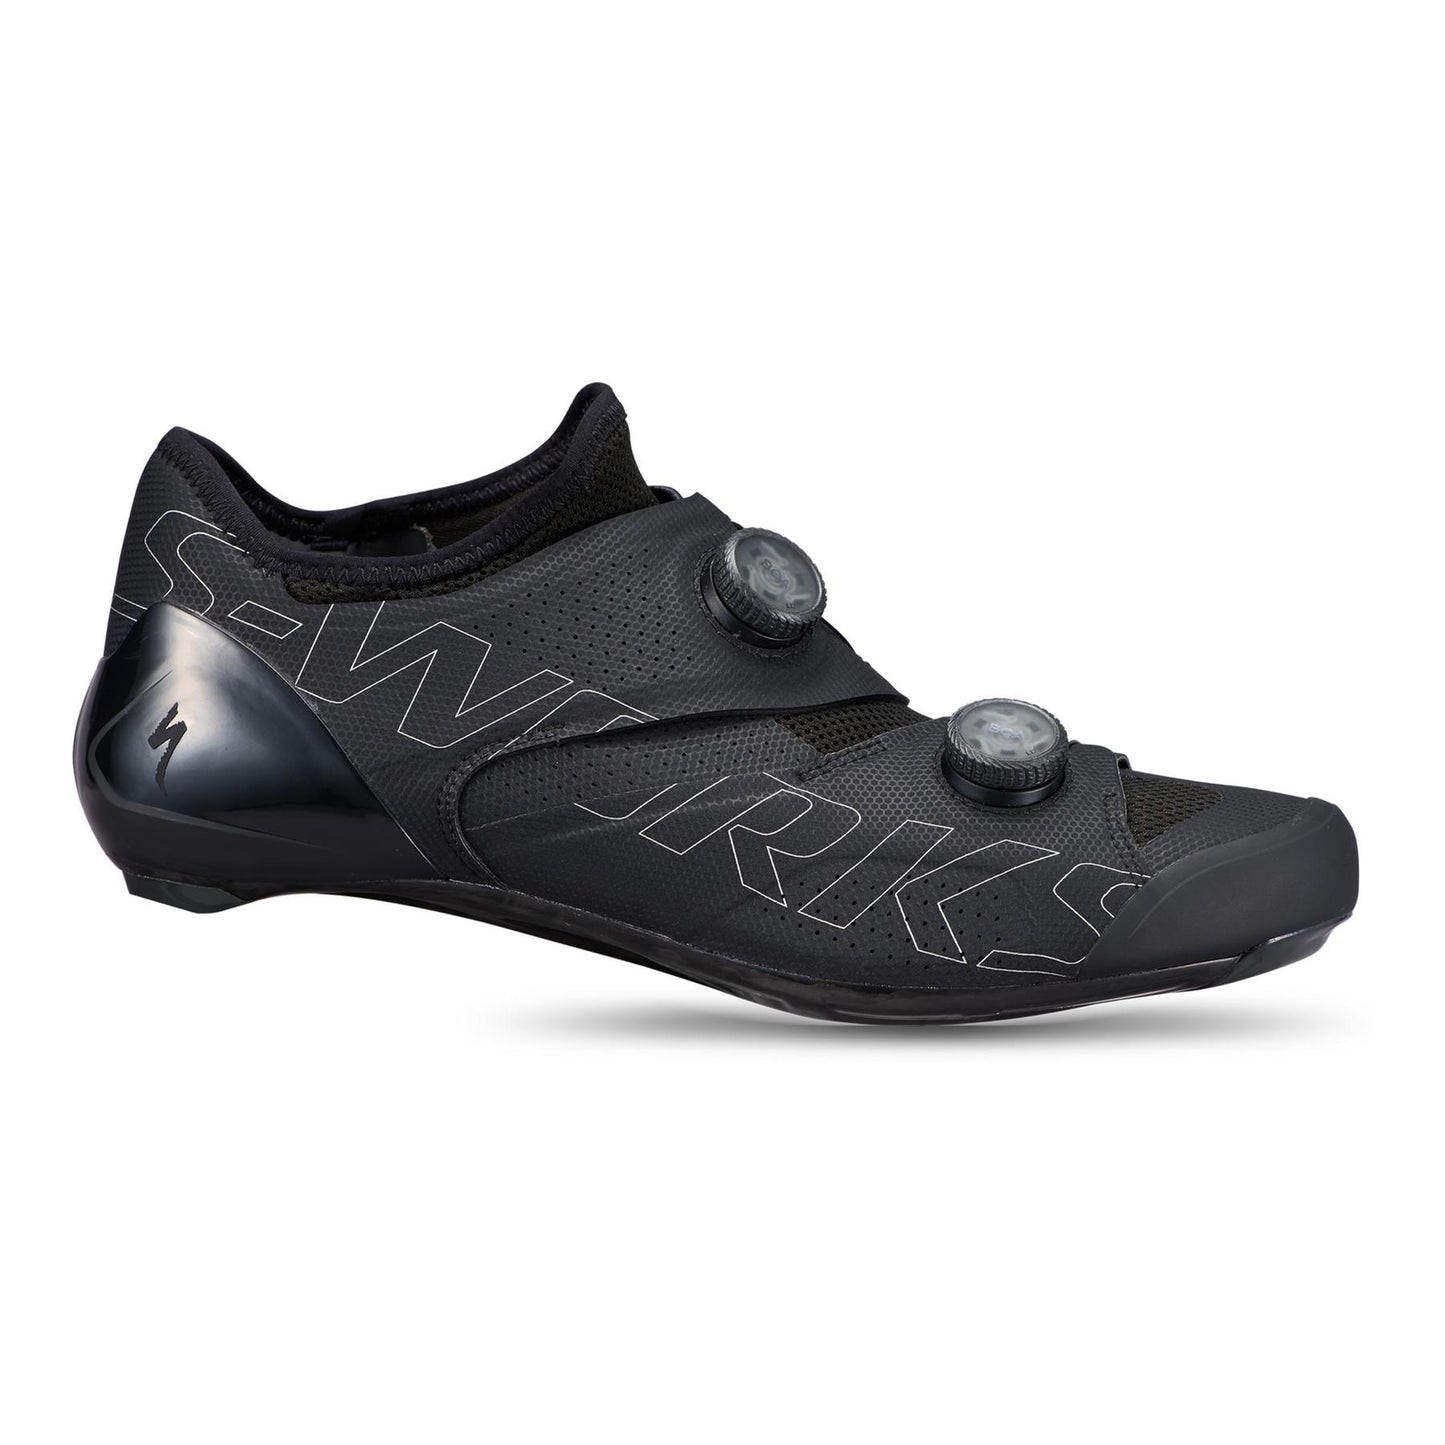 S-Works Ares Road Shoes in Black